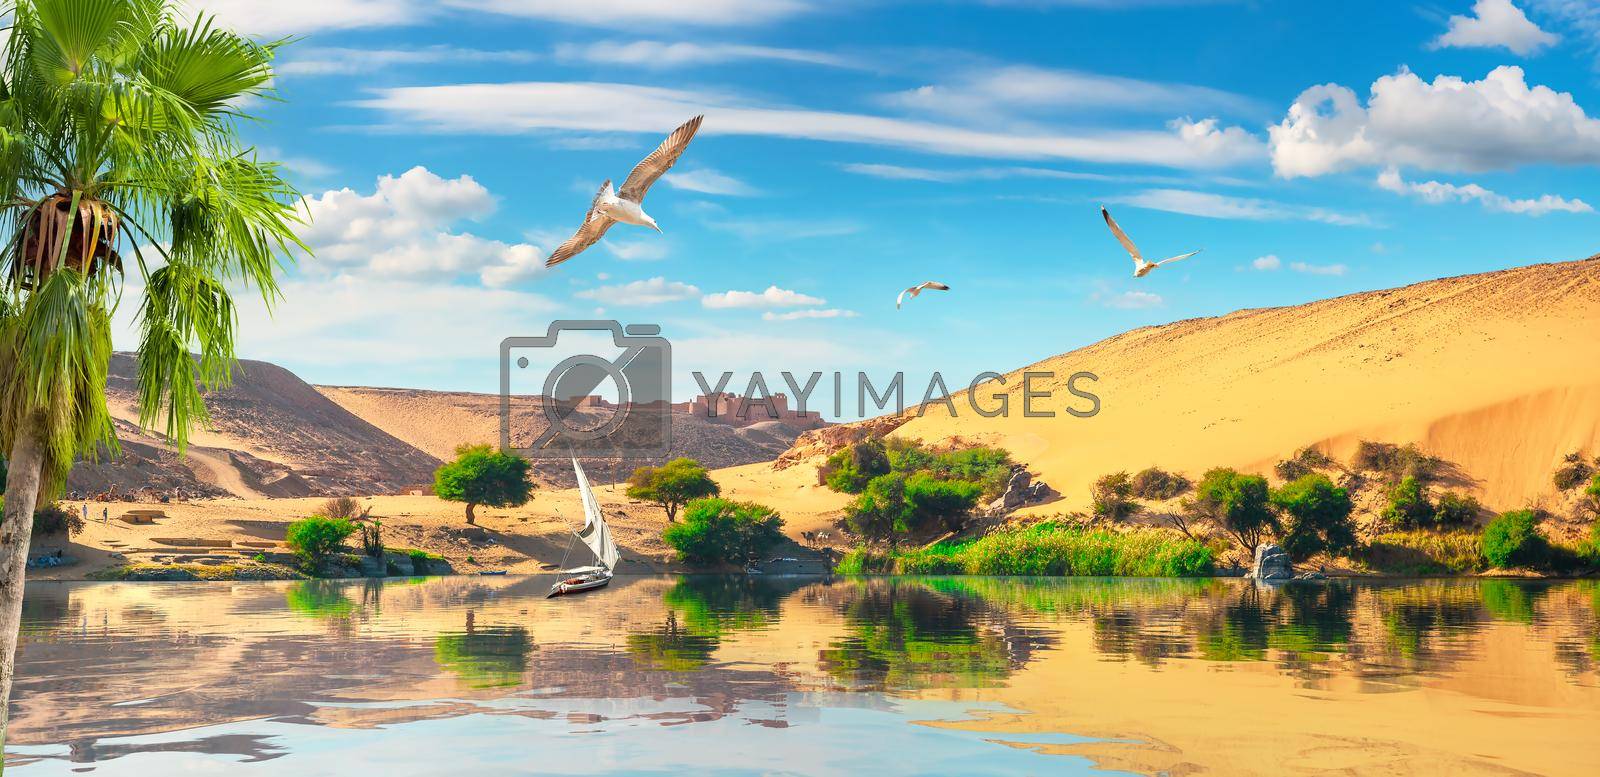 Travel on sailboat by picturesque river Nile in Aswan